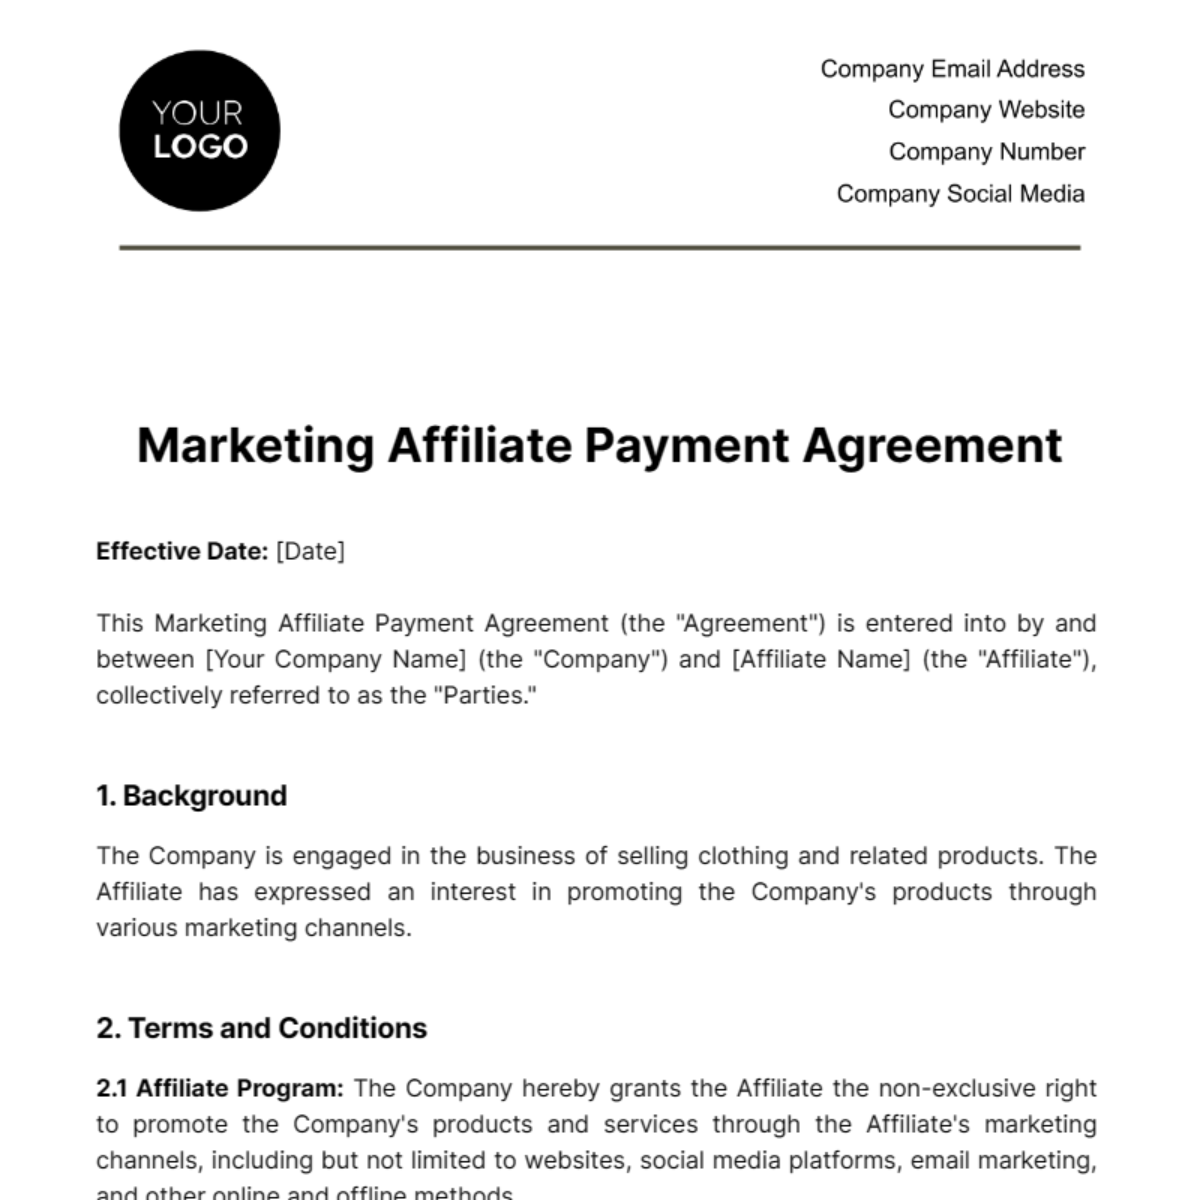 Free Marketing Affiliate Payment Agreement Template